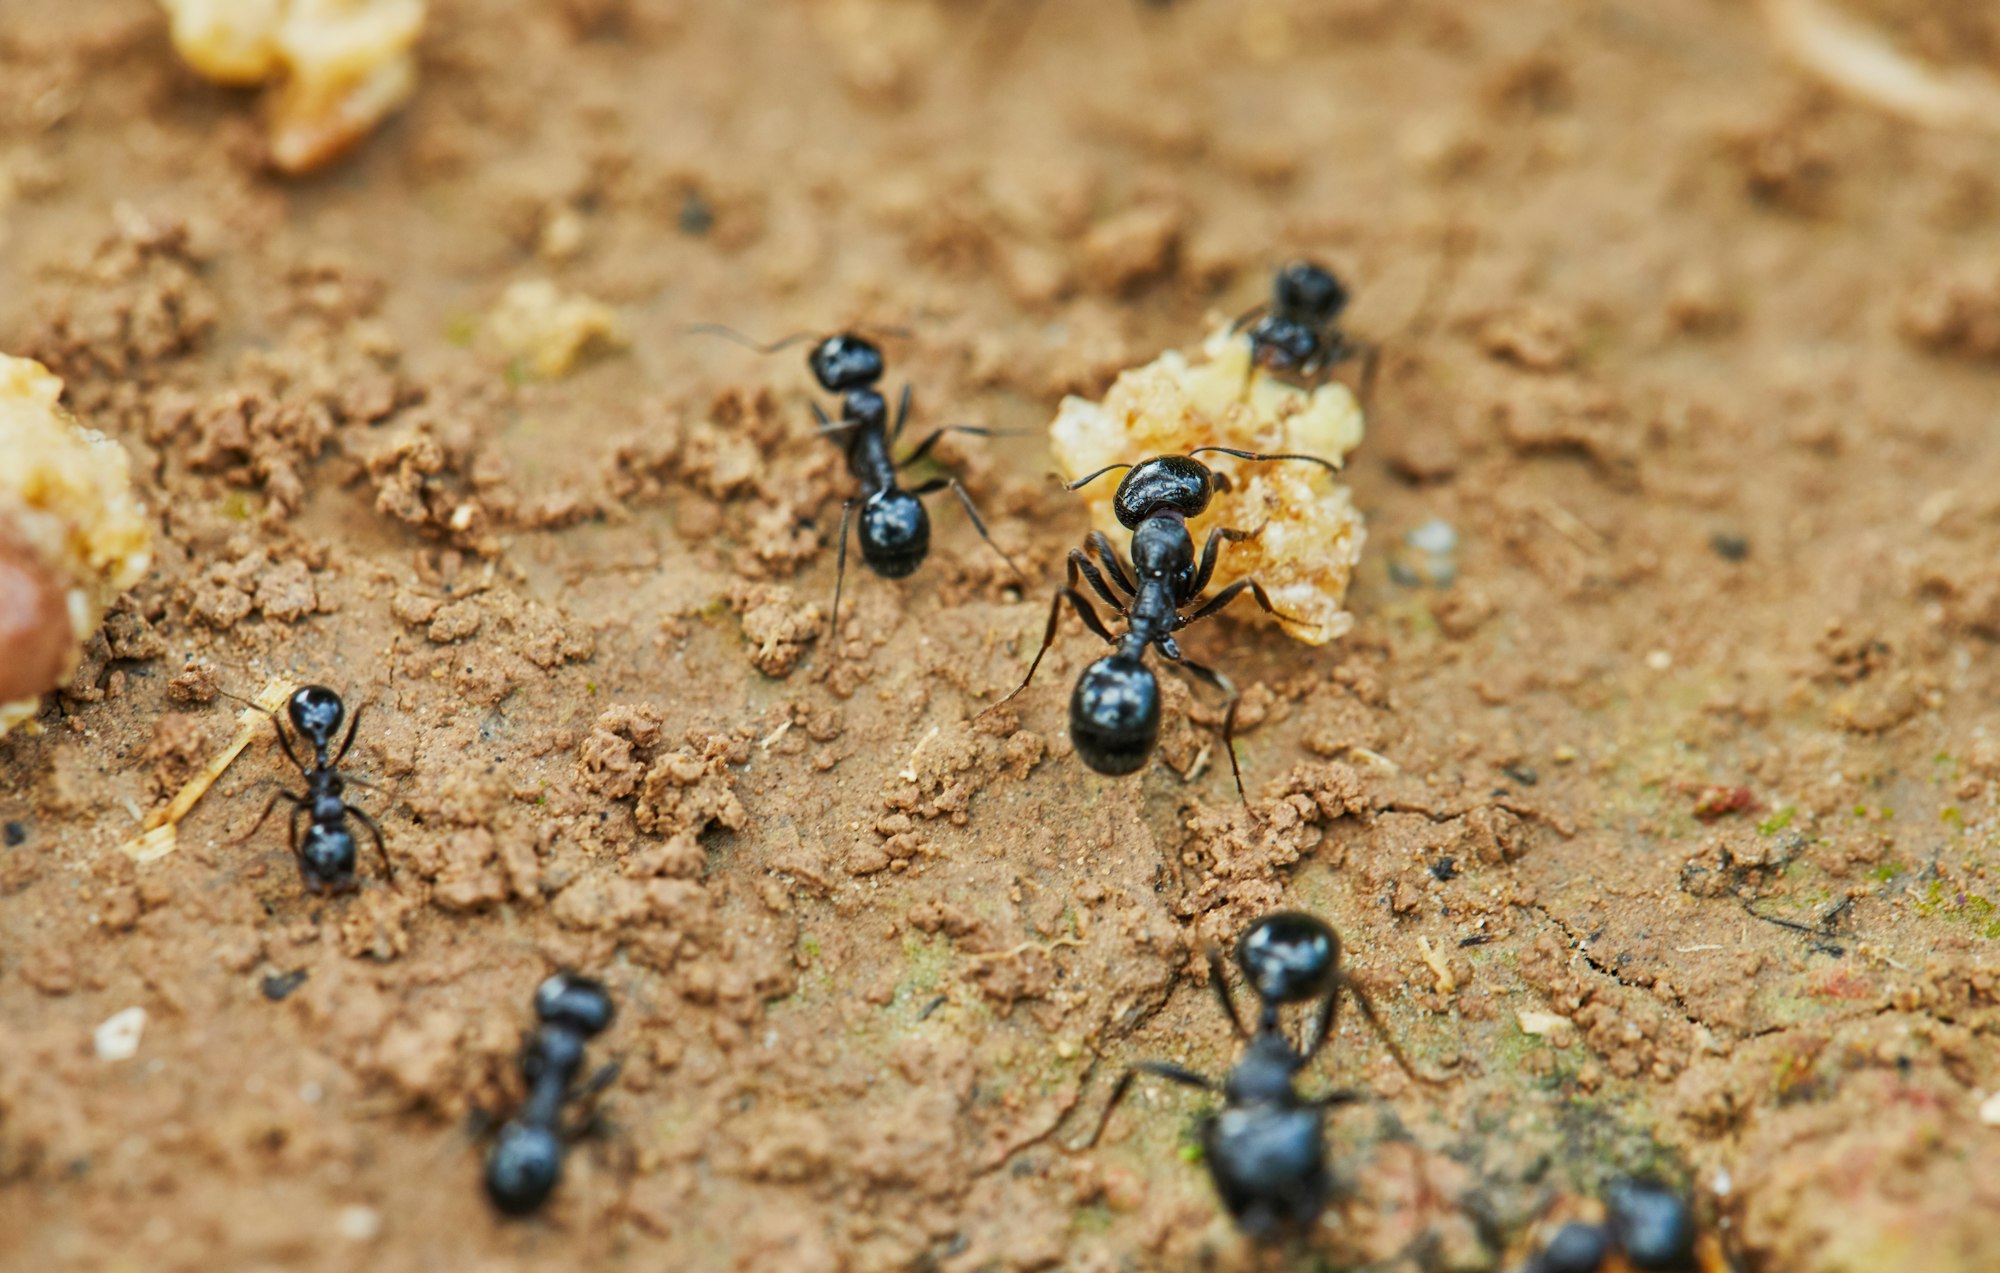 Ants around prey are trying to drag into their home, closeup